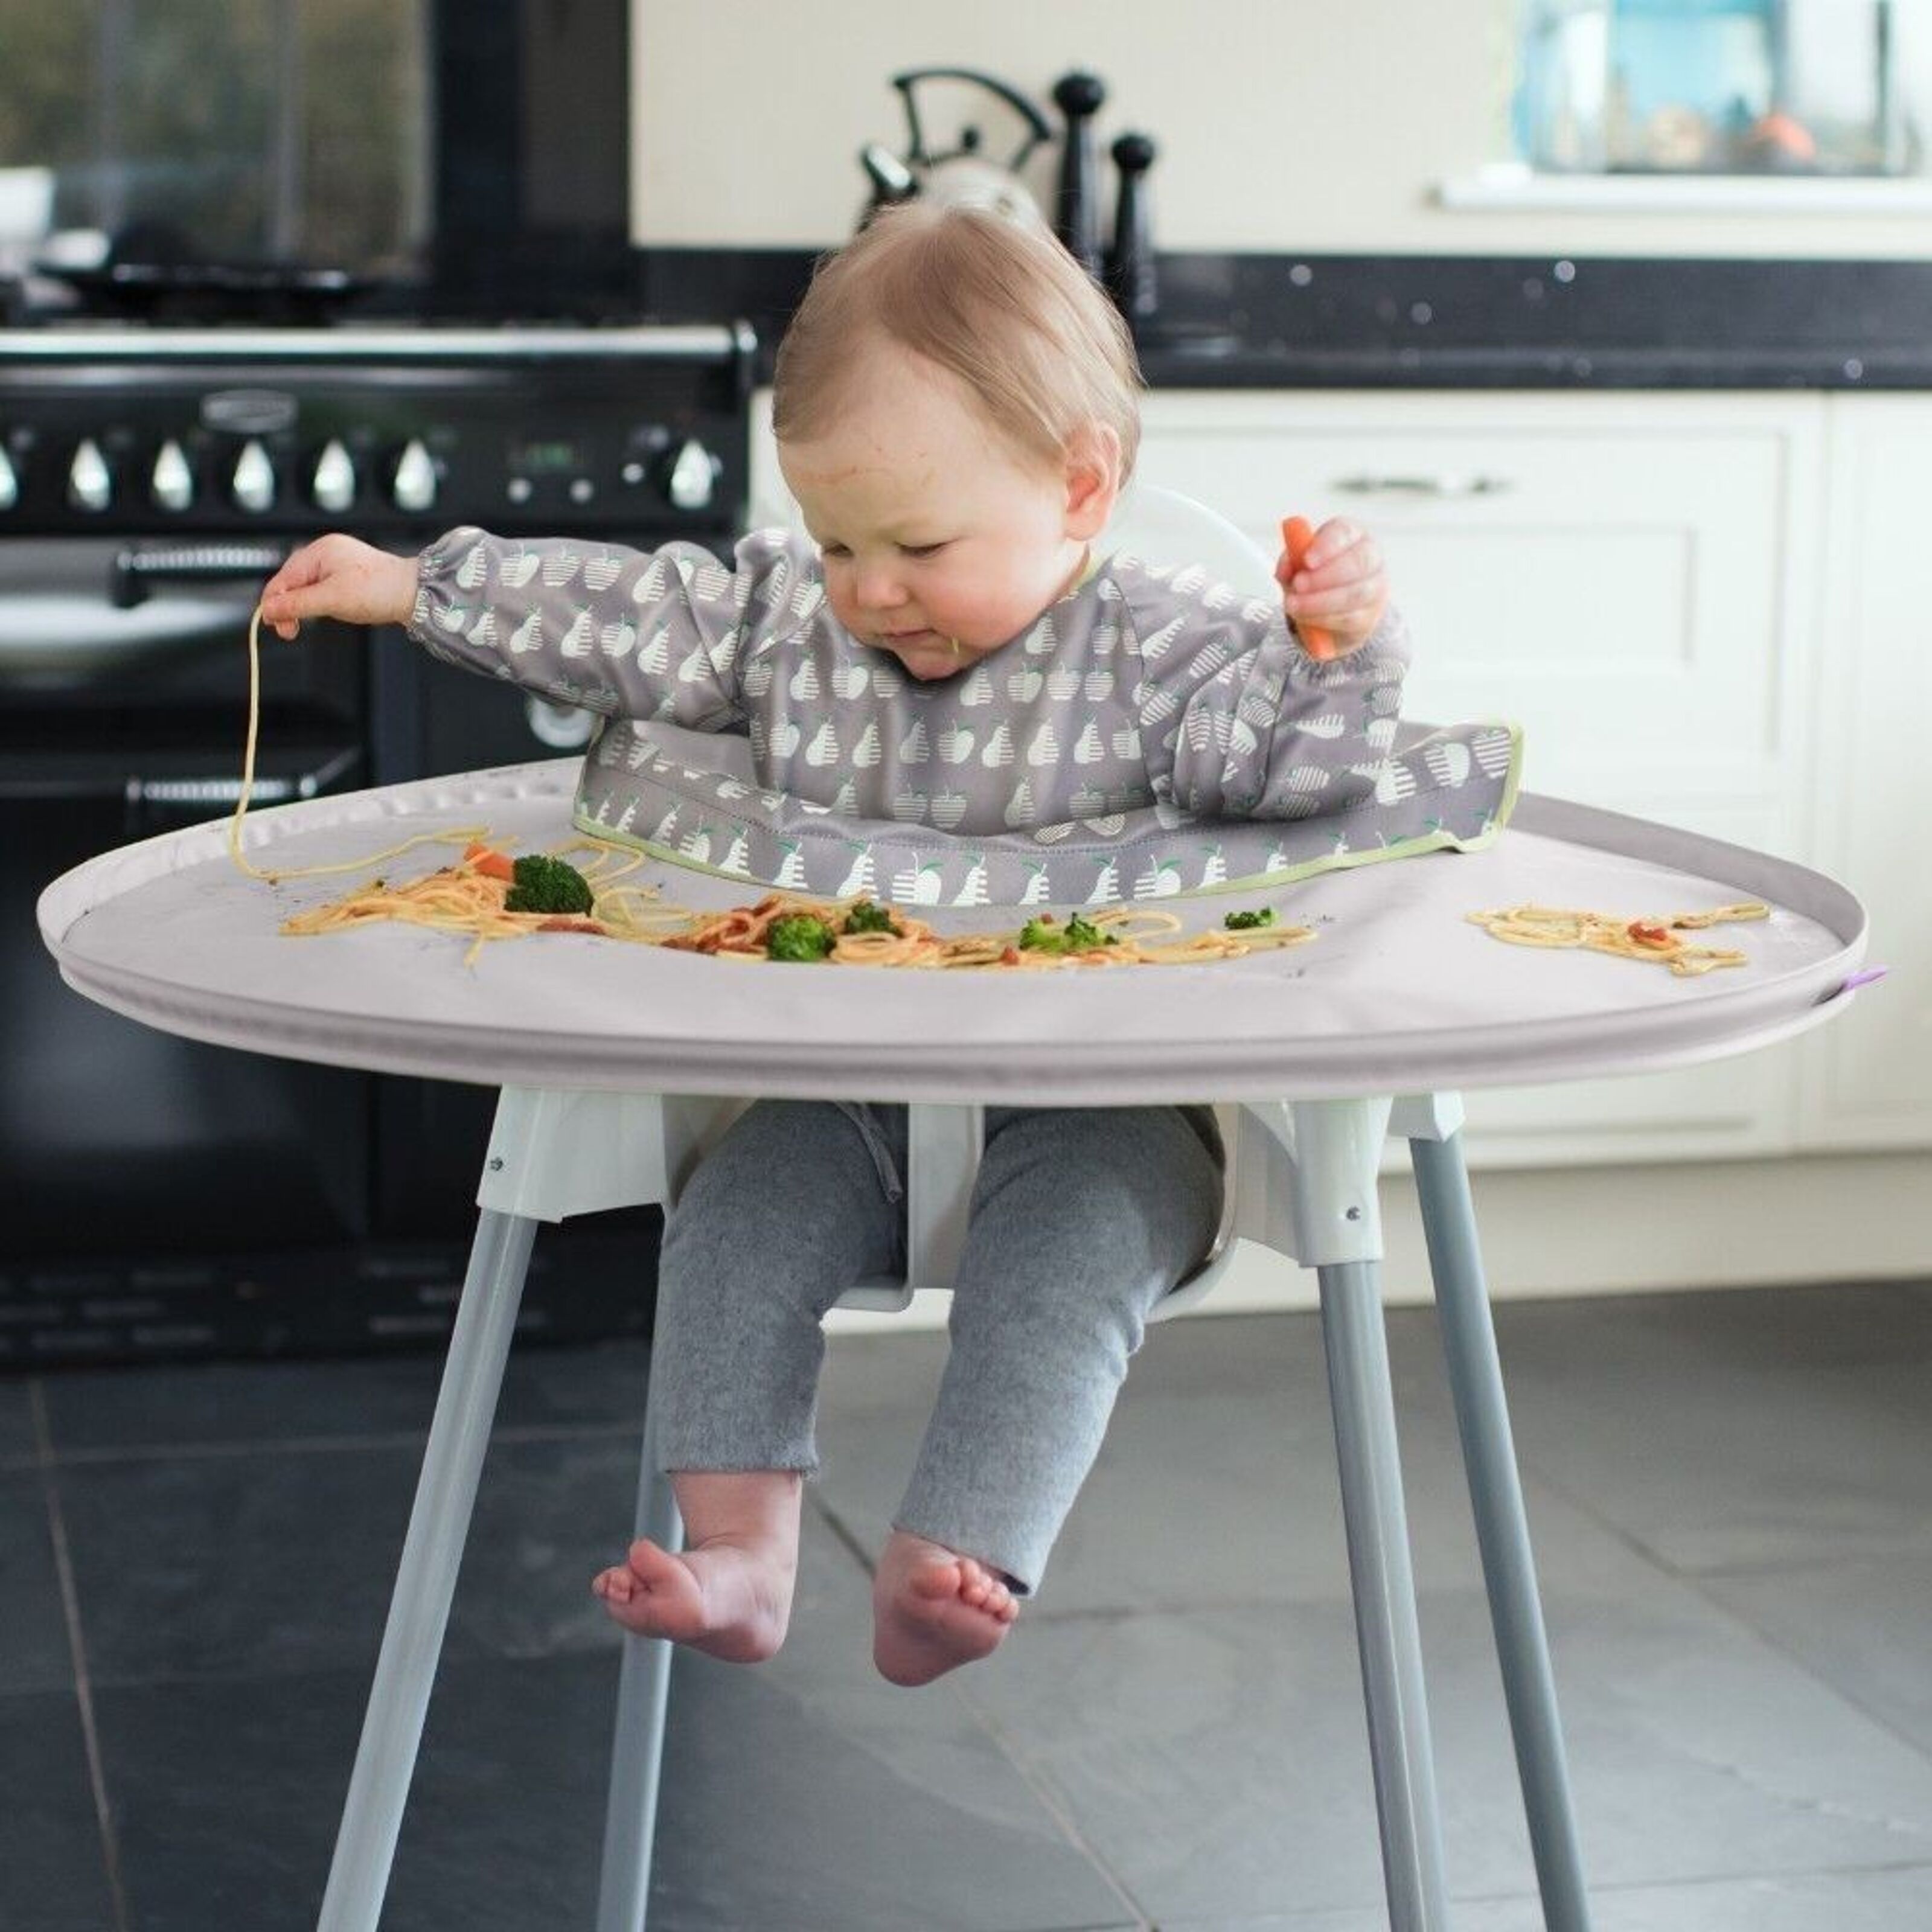 Official Distributor] Additional Bib for For Tidy Tot Bib & Tray Weaning  Kit Baby Led Weaning Mealtime